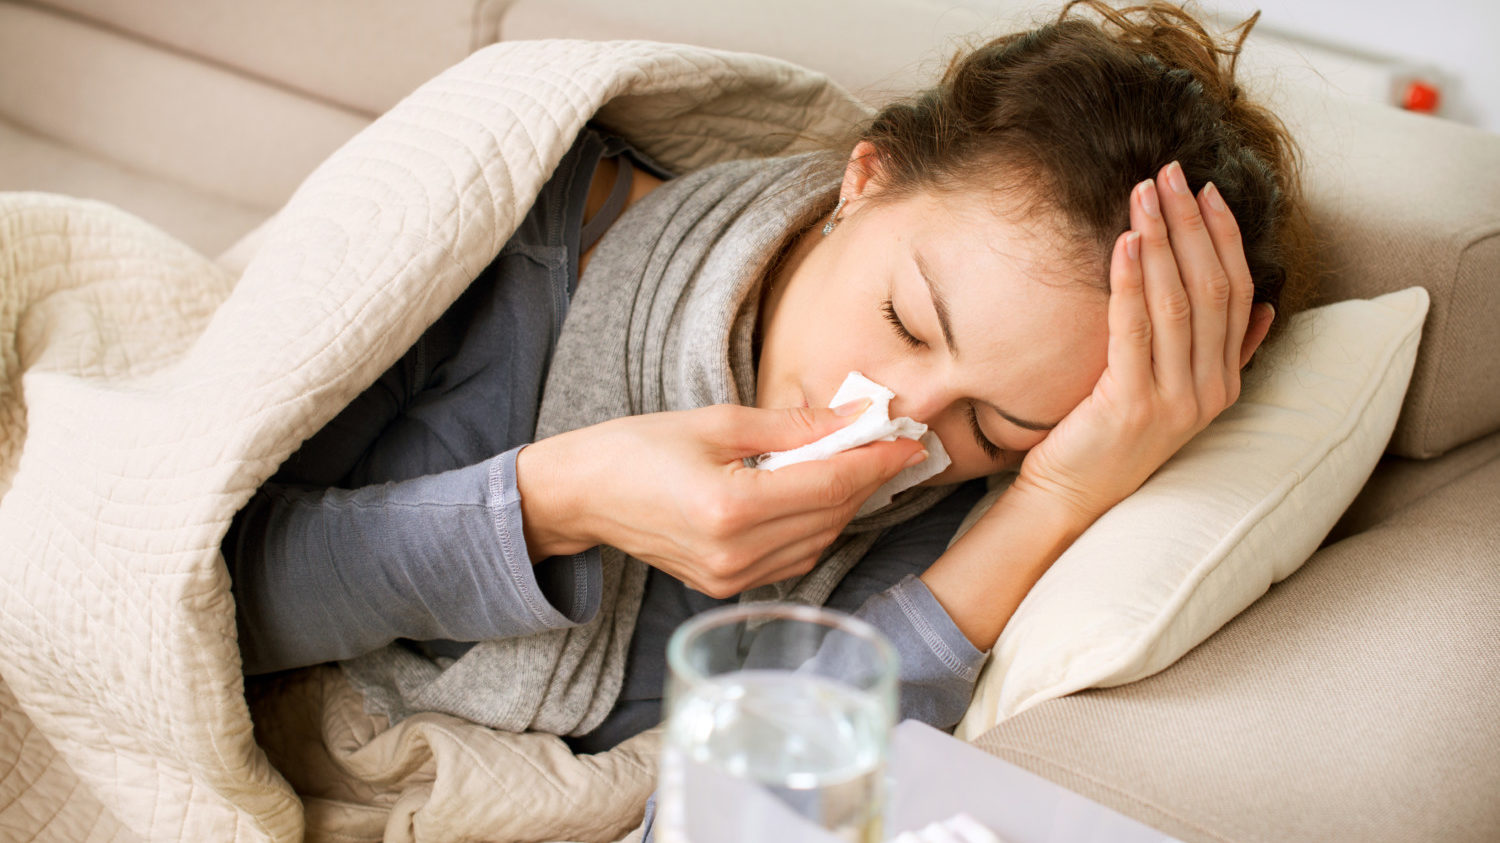 Woman sick with cold or flu